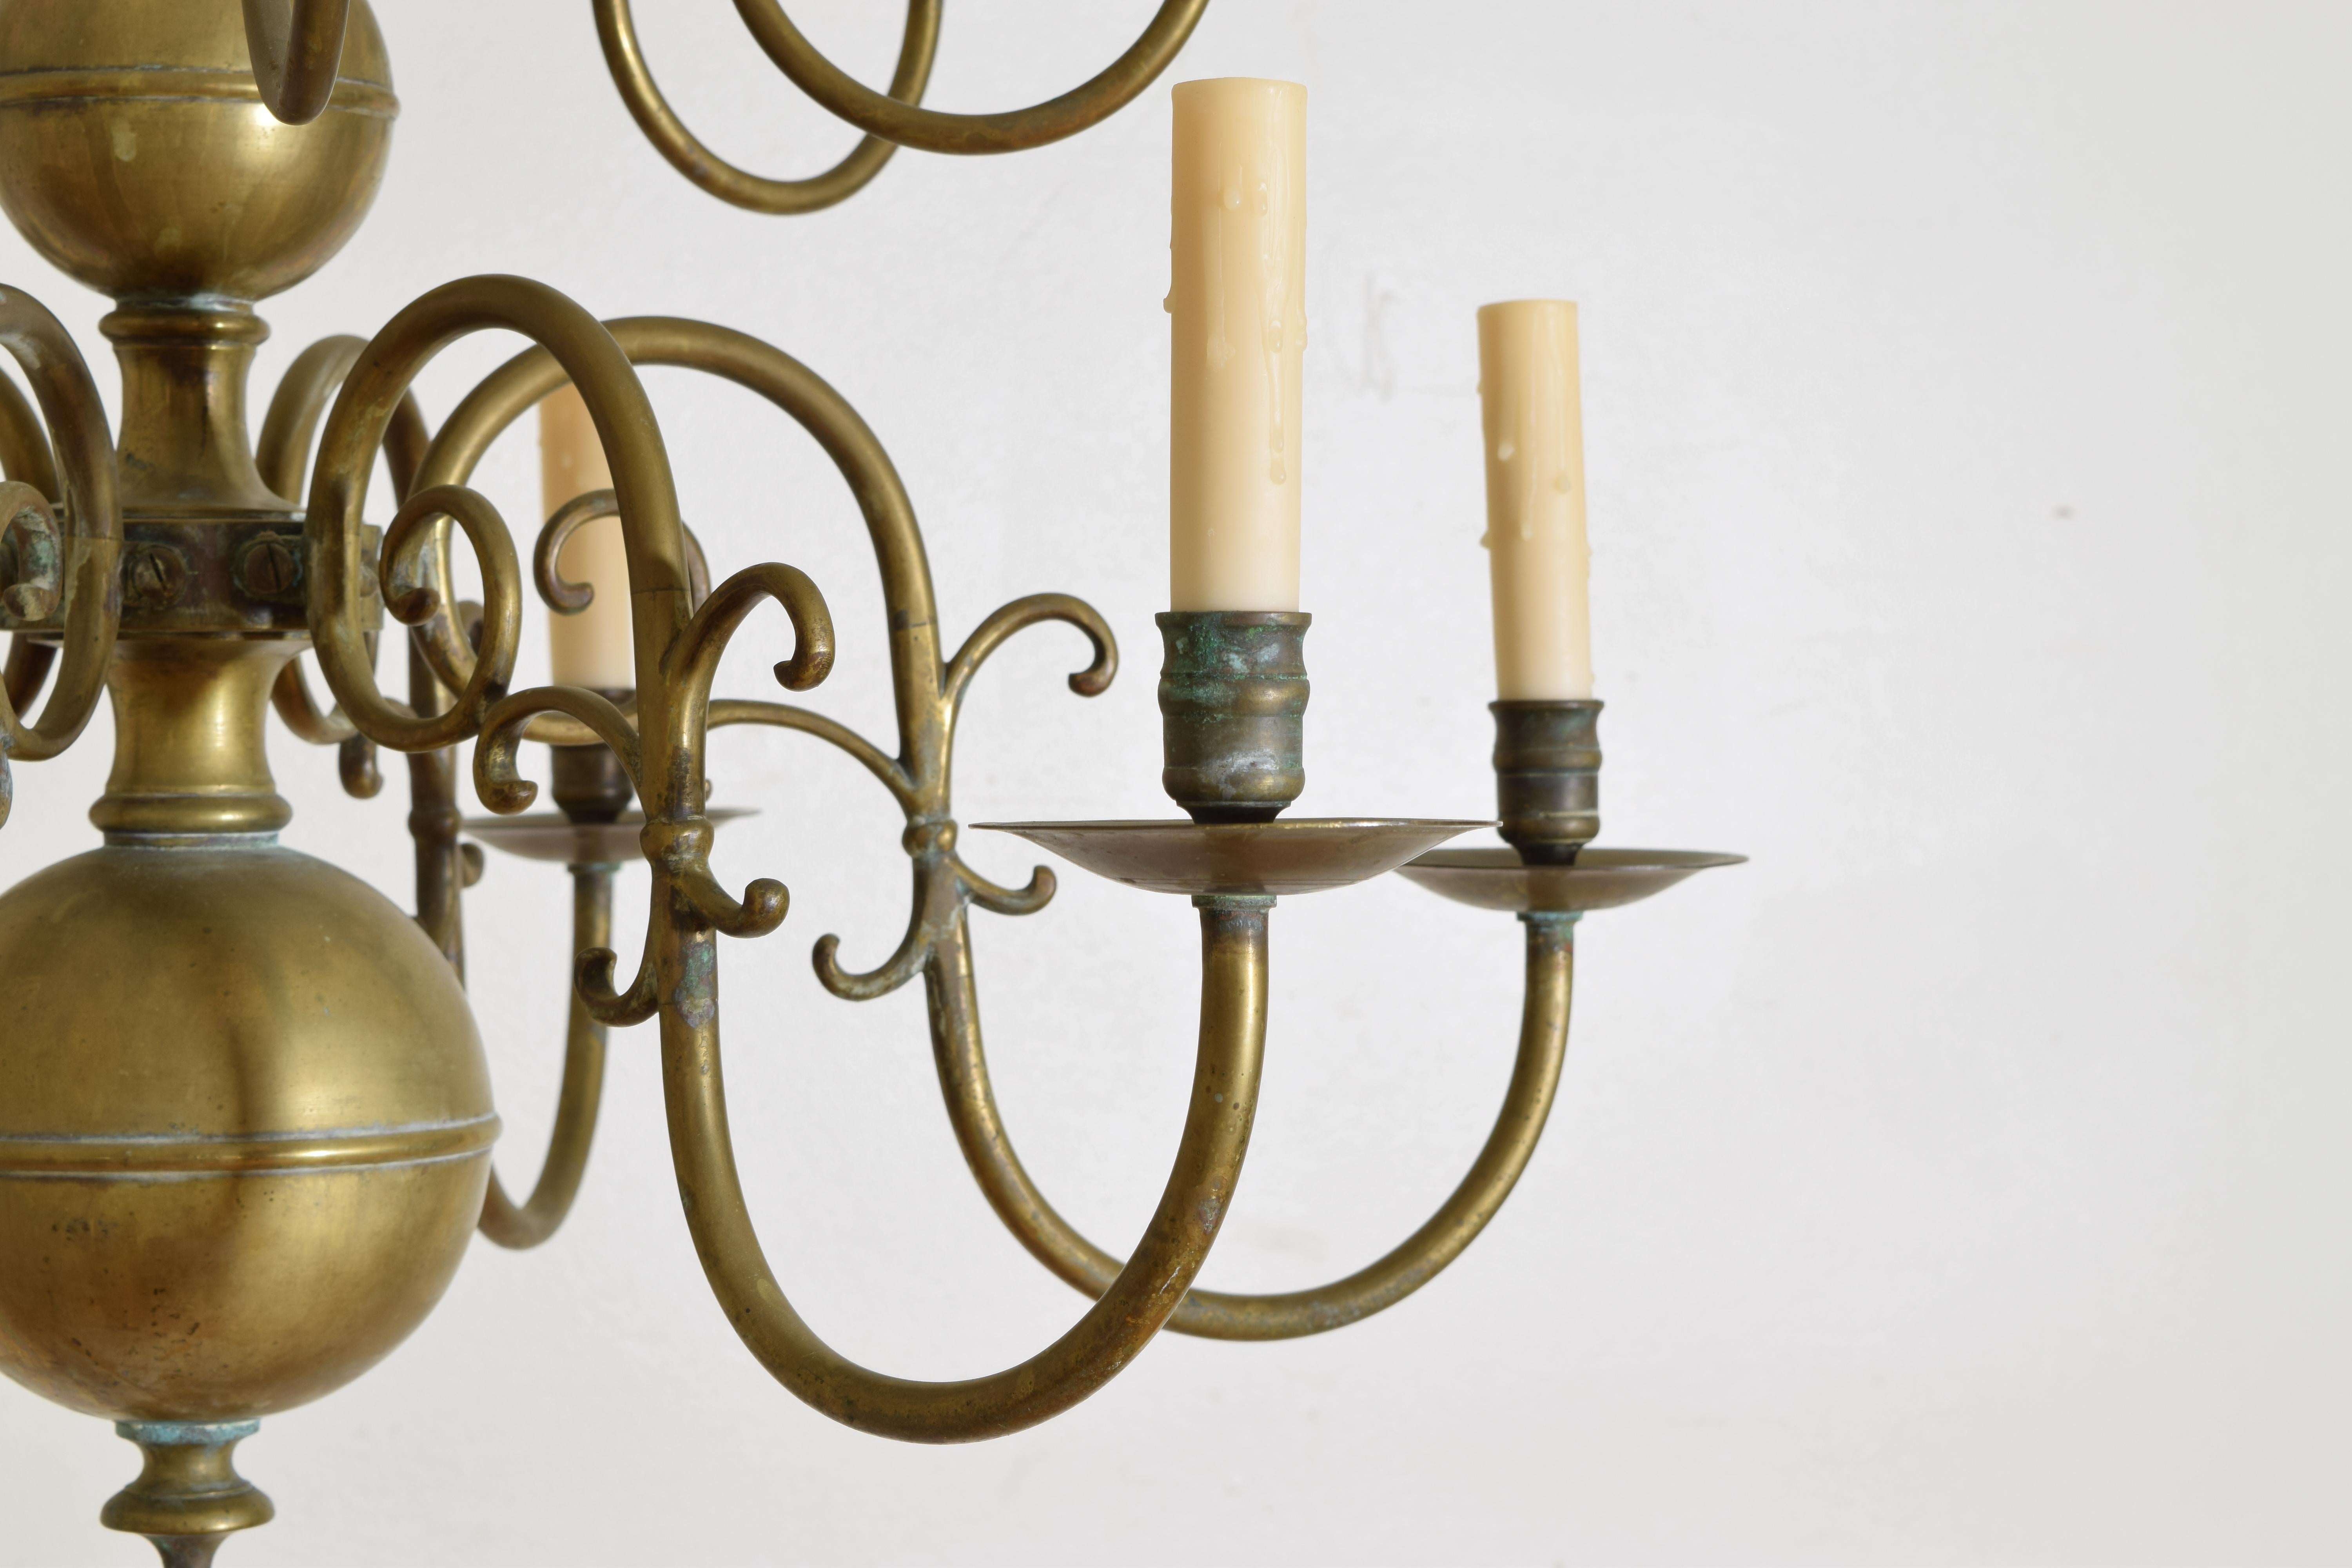 Dutch or French Patinated Brass 2-Tier 12-Light Chandelier, 2nd half 19th cen. For Sale 1